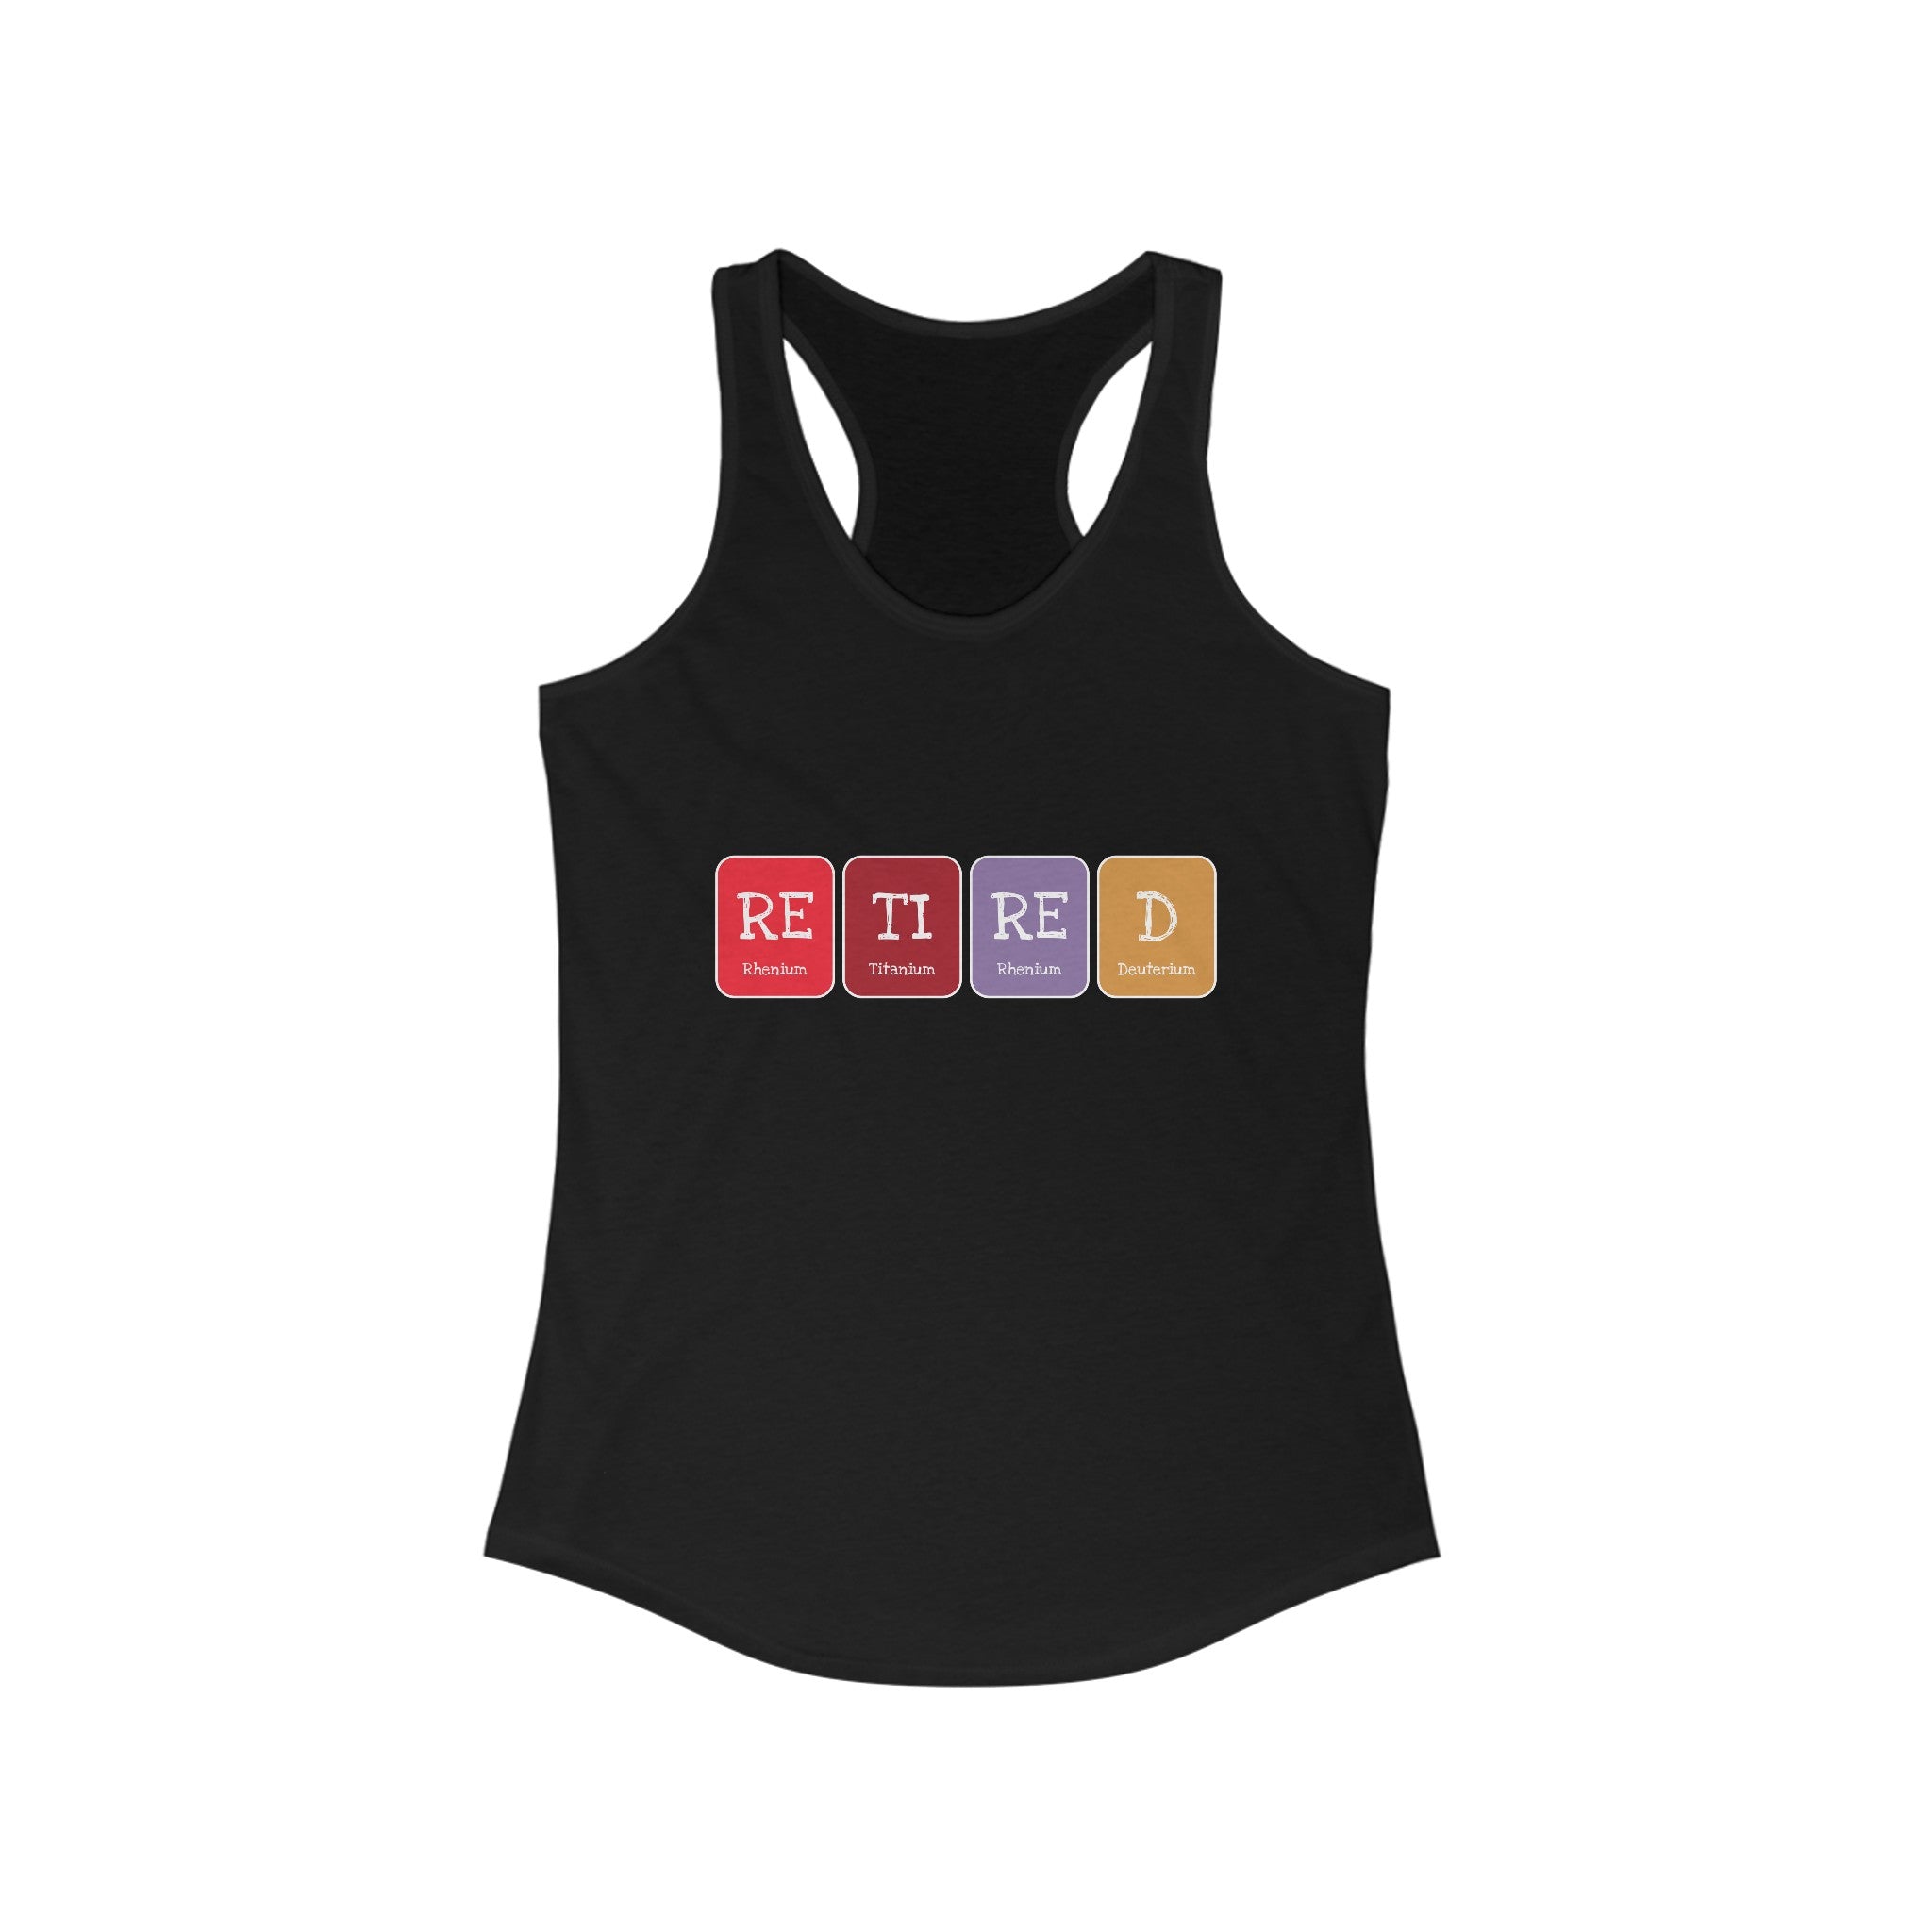 An ultra-lightweight black Retired - Women's Racerback Tank featuring an active style and the word "RETIRED" displayed using periodic table elements symbols: Rhenium (Re), Titanium (Ti), Tellurium (Te), and Dysprosium (Dy).